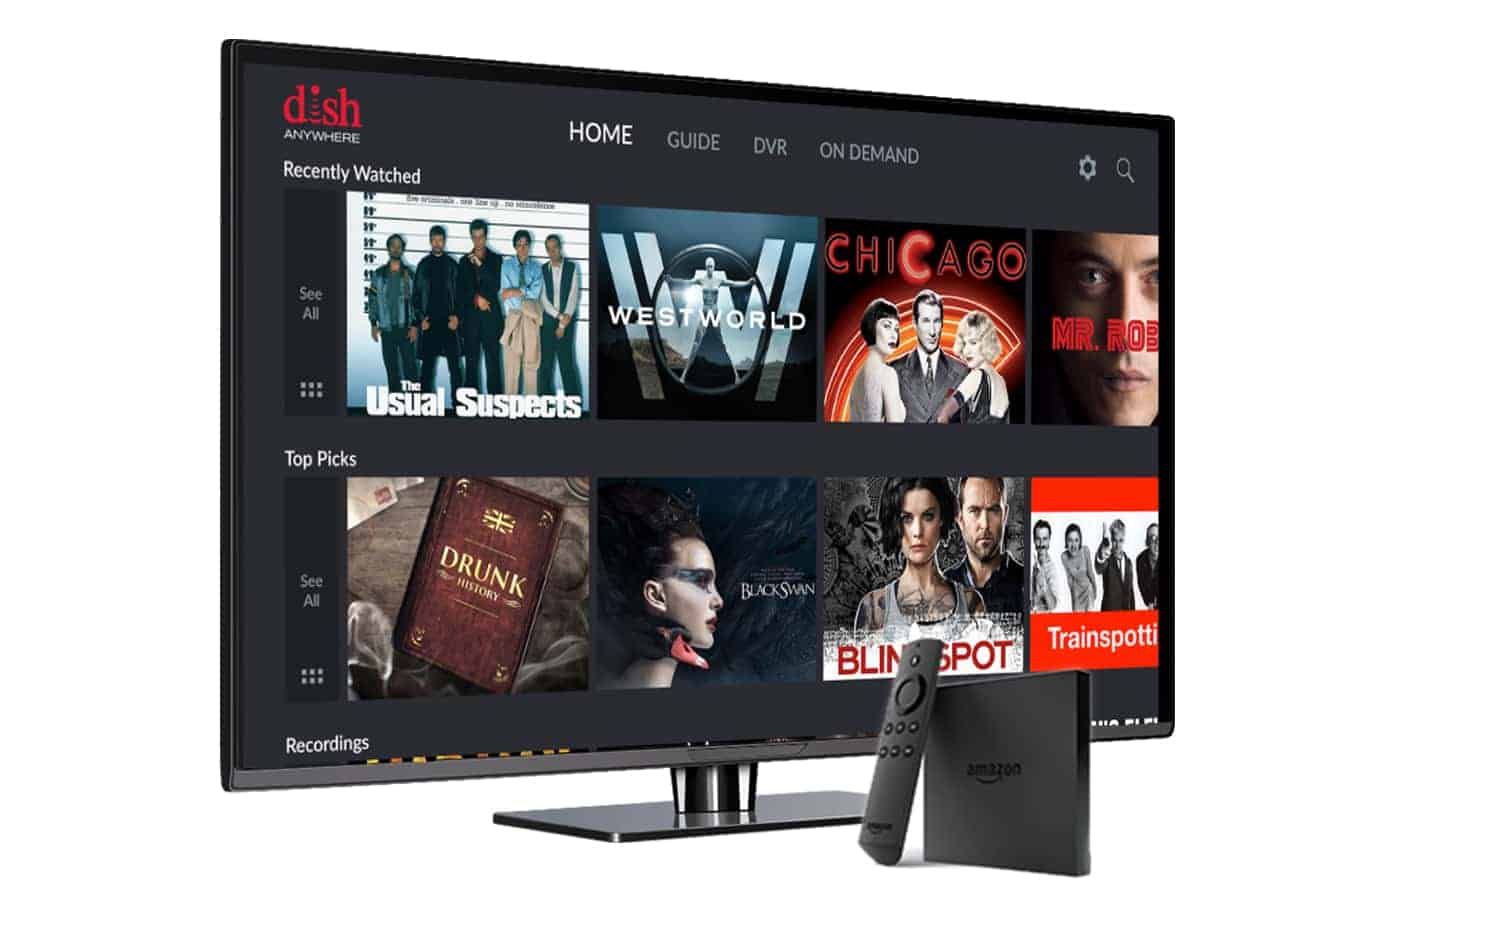 How To Install Dish Anywhere On Smart TV